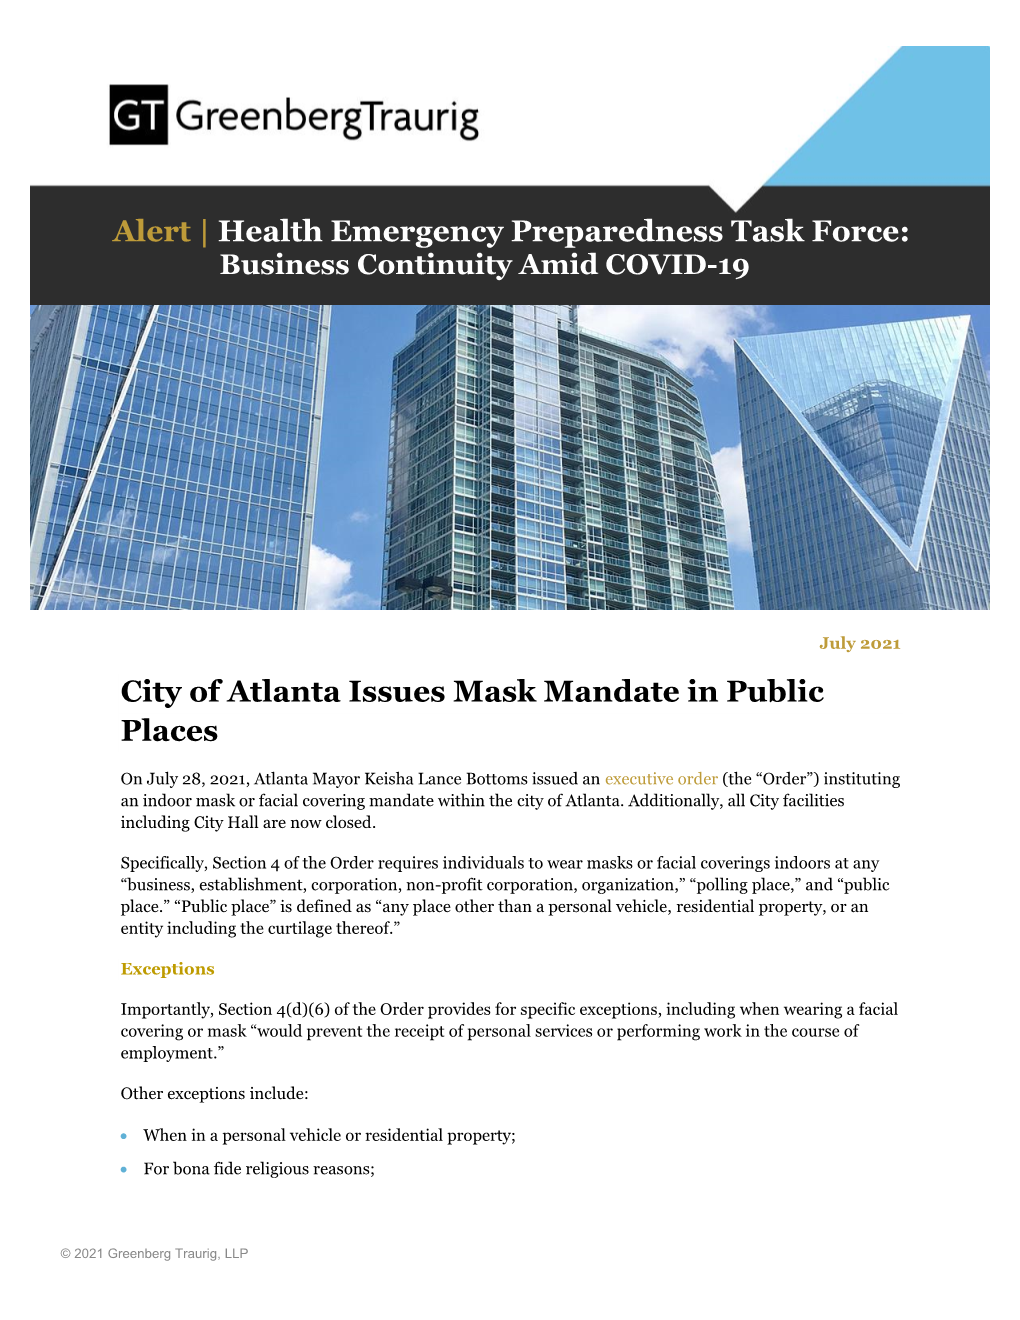 GT Alert City of Atlanta Issues Mask Mandate in Public Places